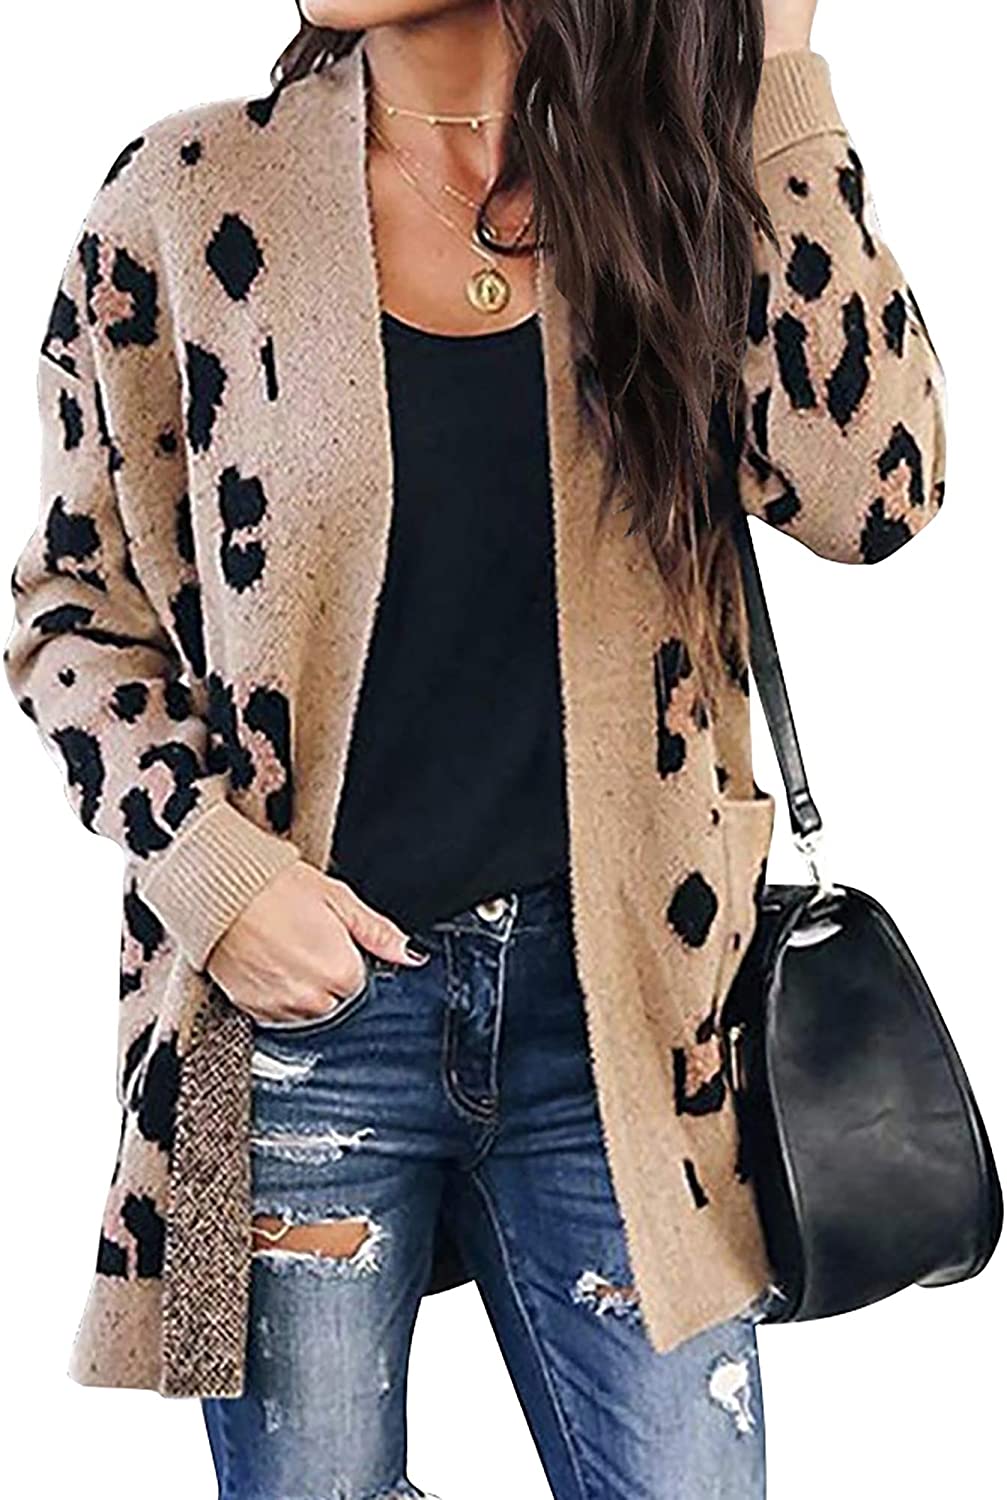 BTFBM Women Chic Leopard Print Cozy Sweater Pockets Button Down Open Front Loose Knitted Long Cardigan with Sleeves 